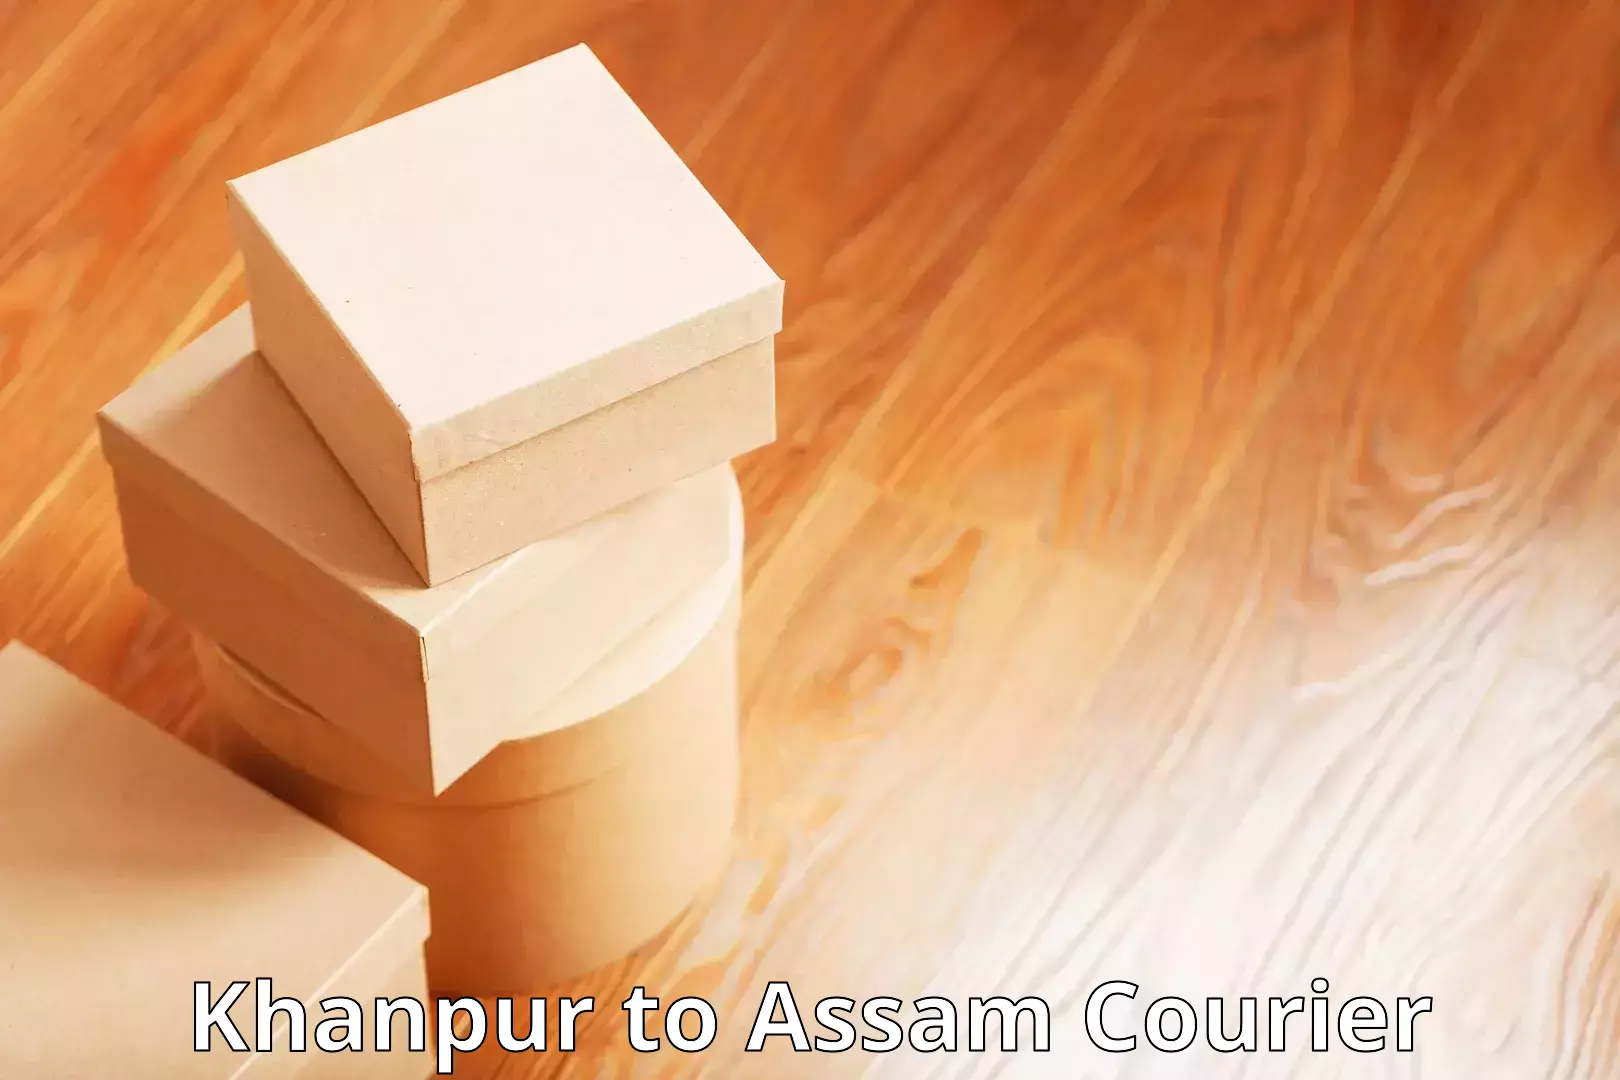 Streamlined delivery processes Khanpur to Assam